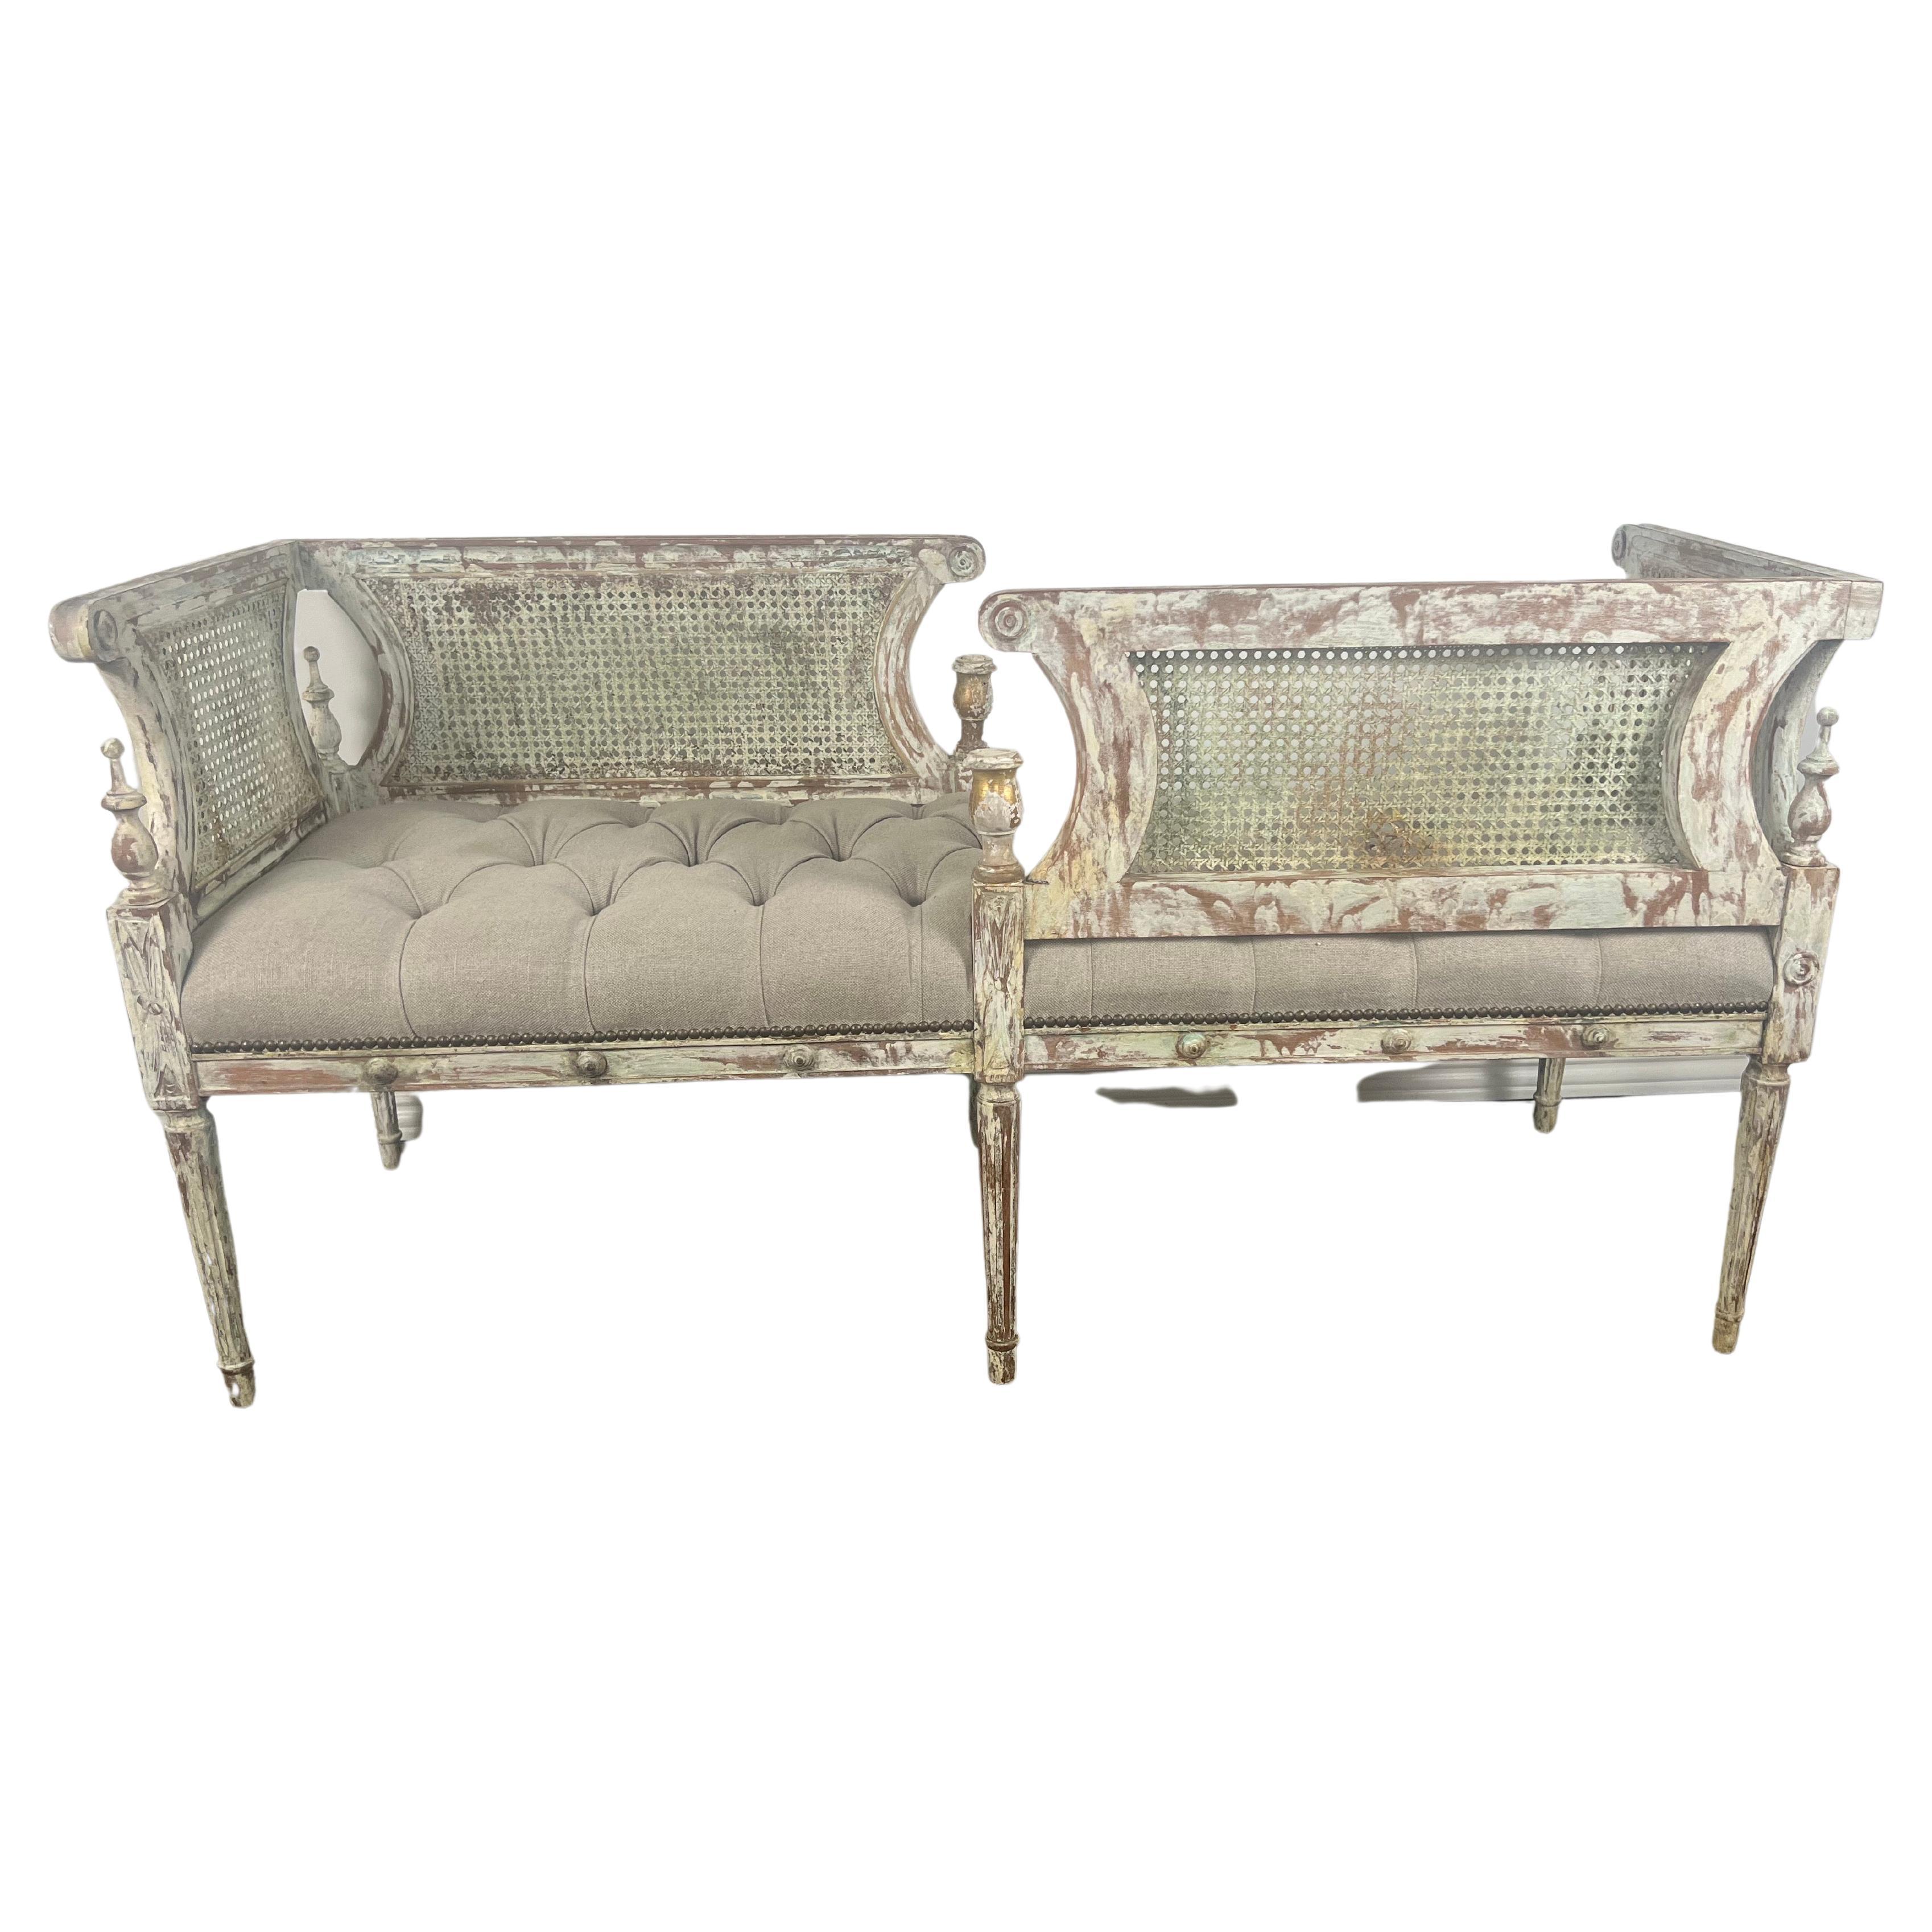 19th C. French Louis XVI Style Double Seat Bench